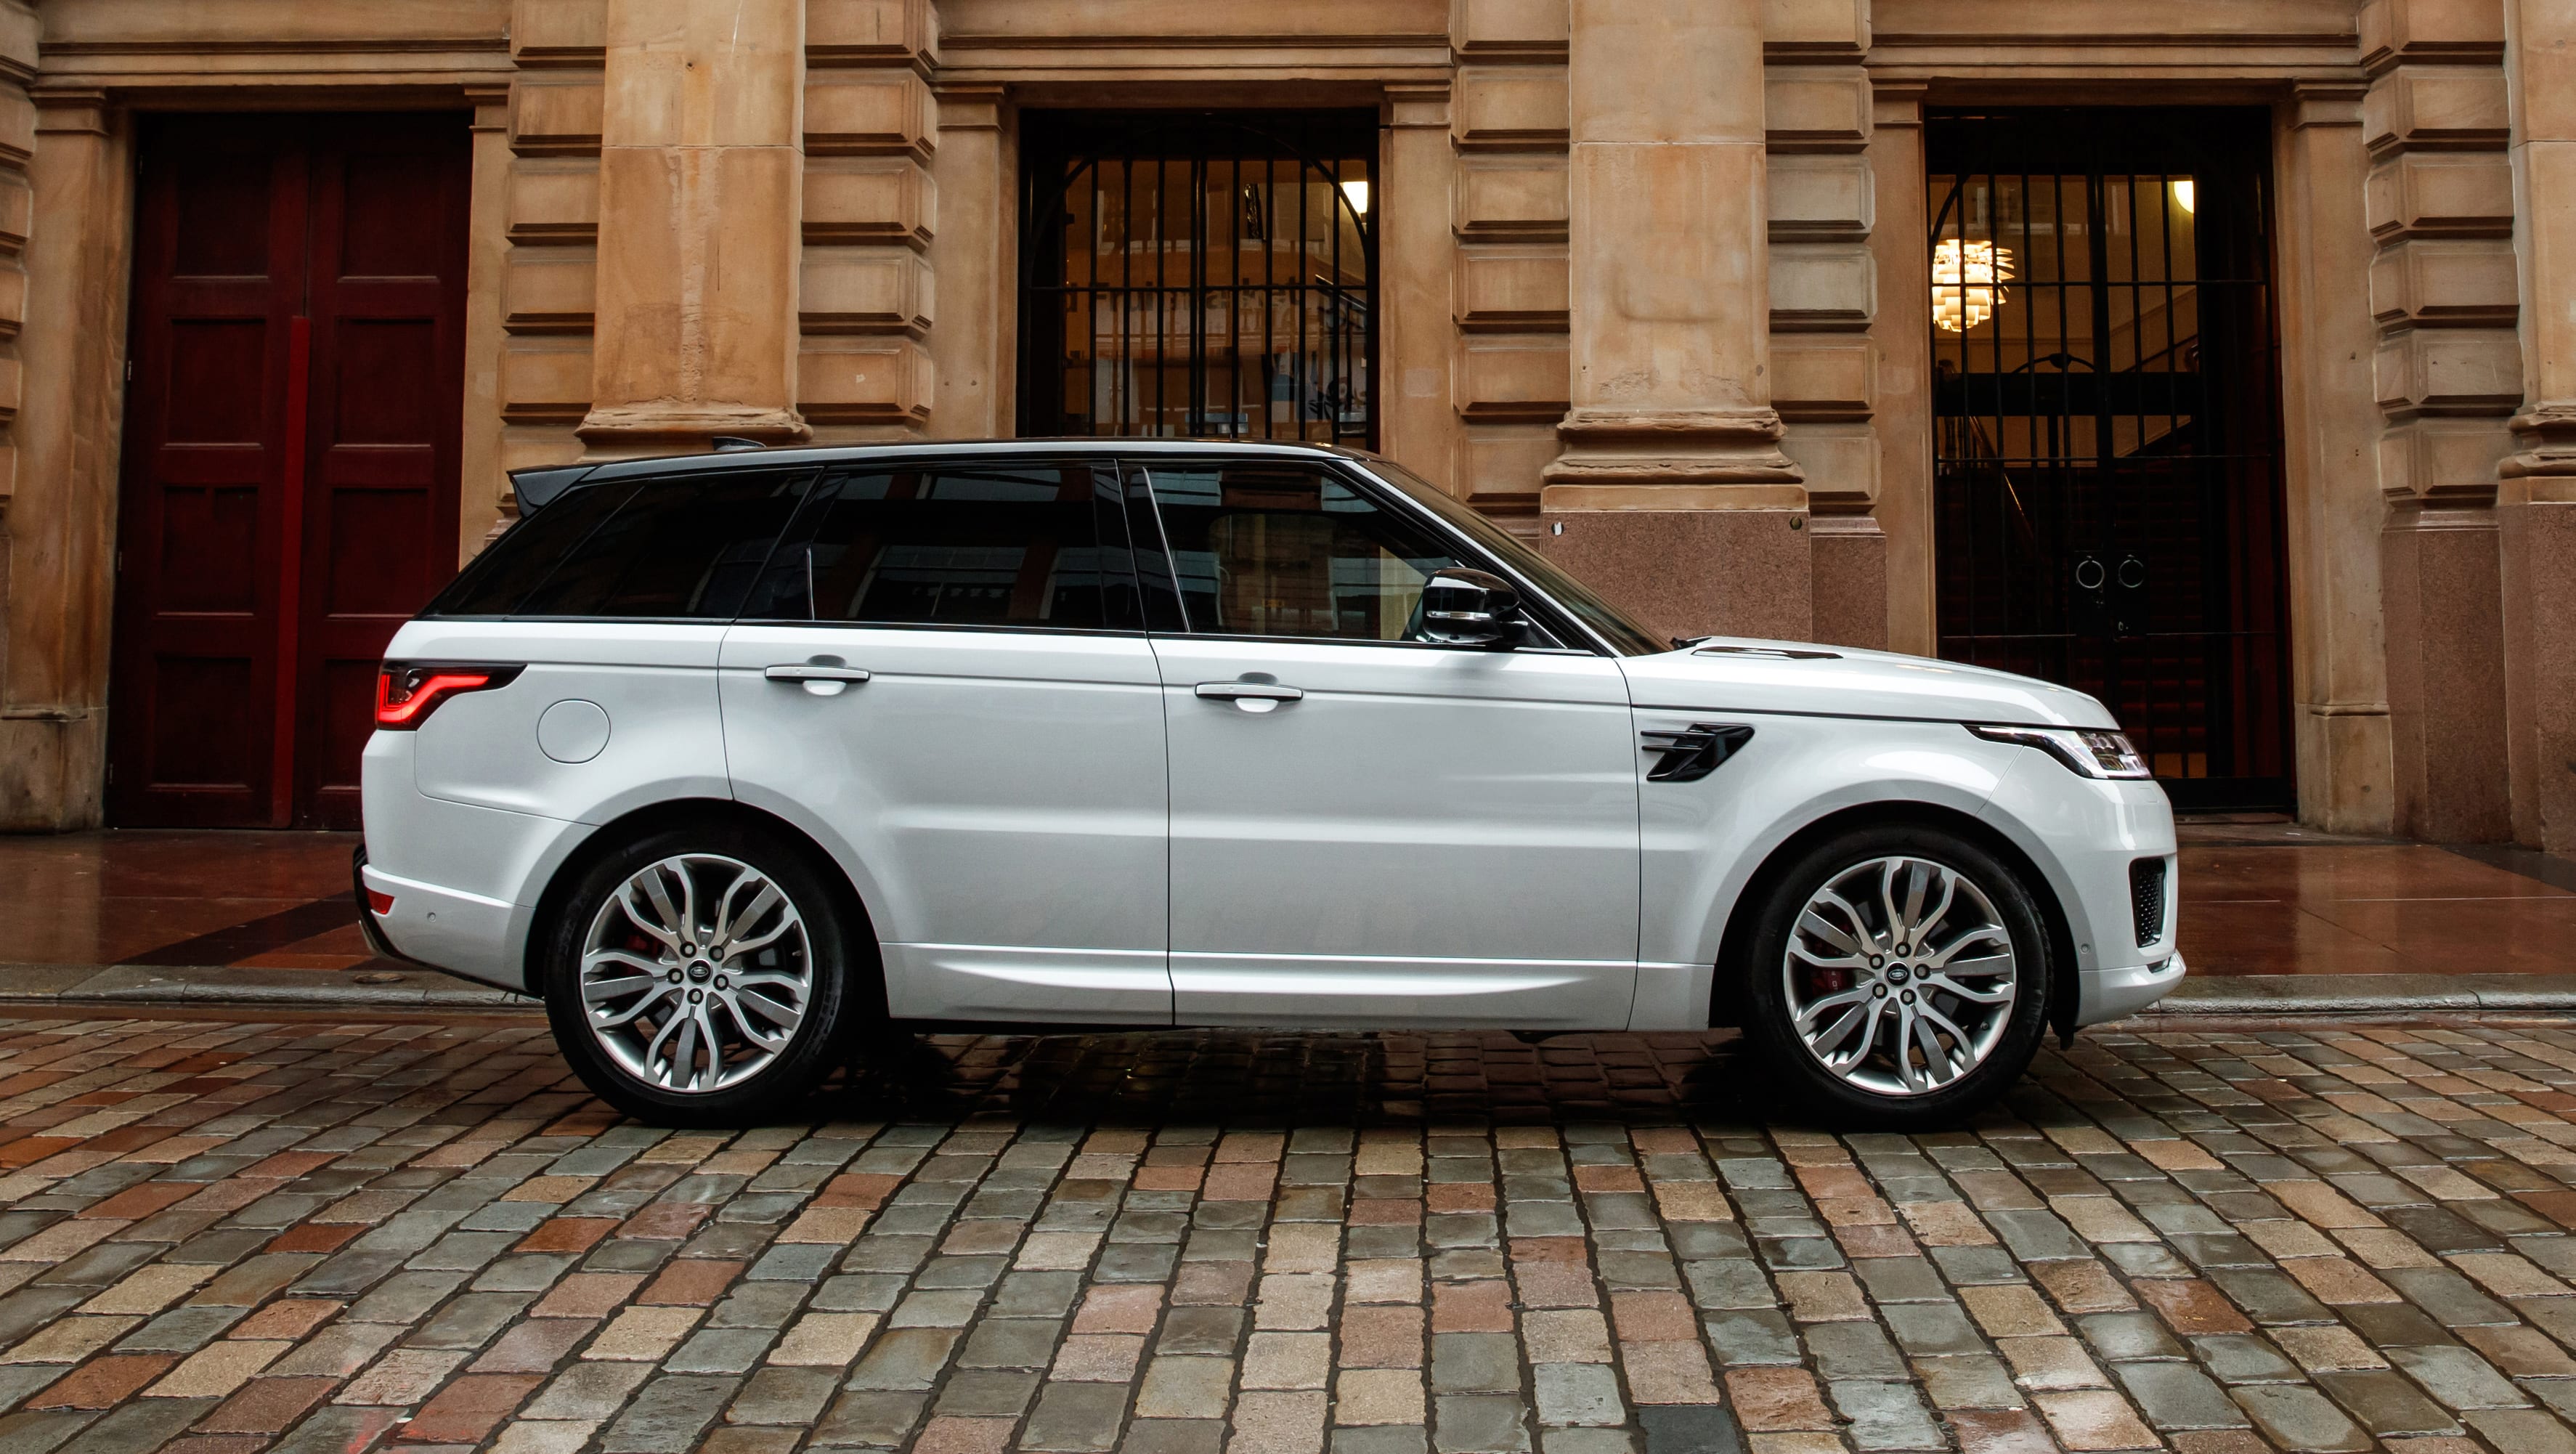 New Range Rover Sport 2021 detailed: Big changes under the skin for BMW